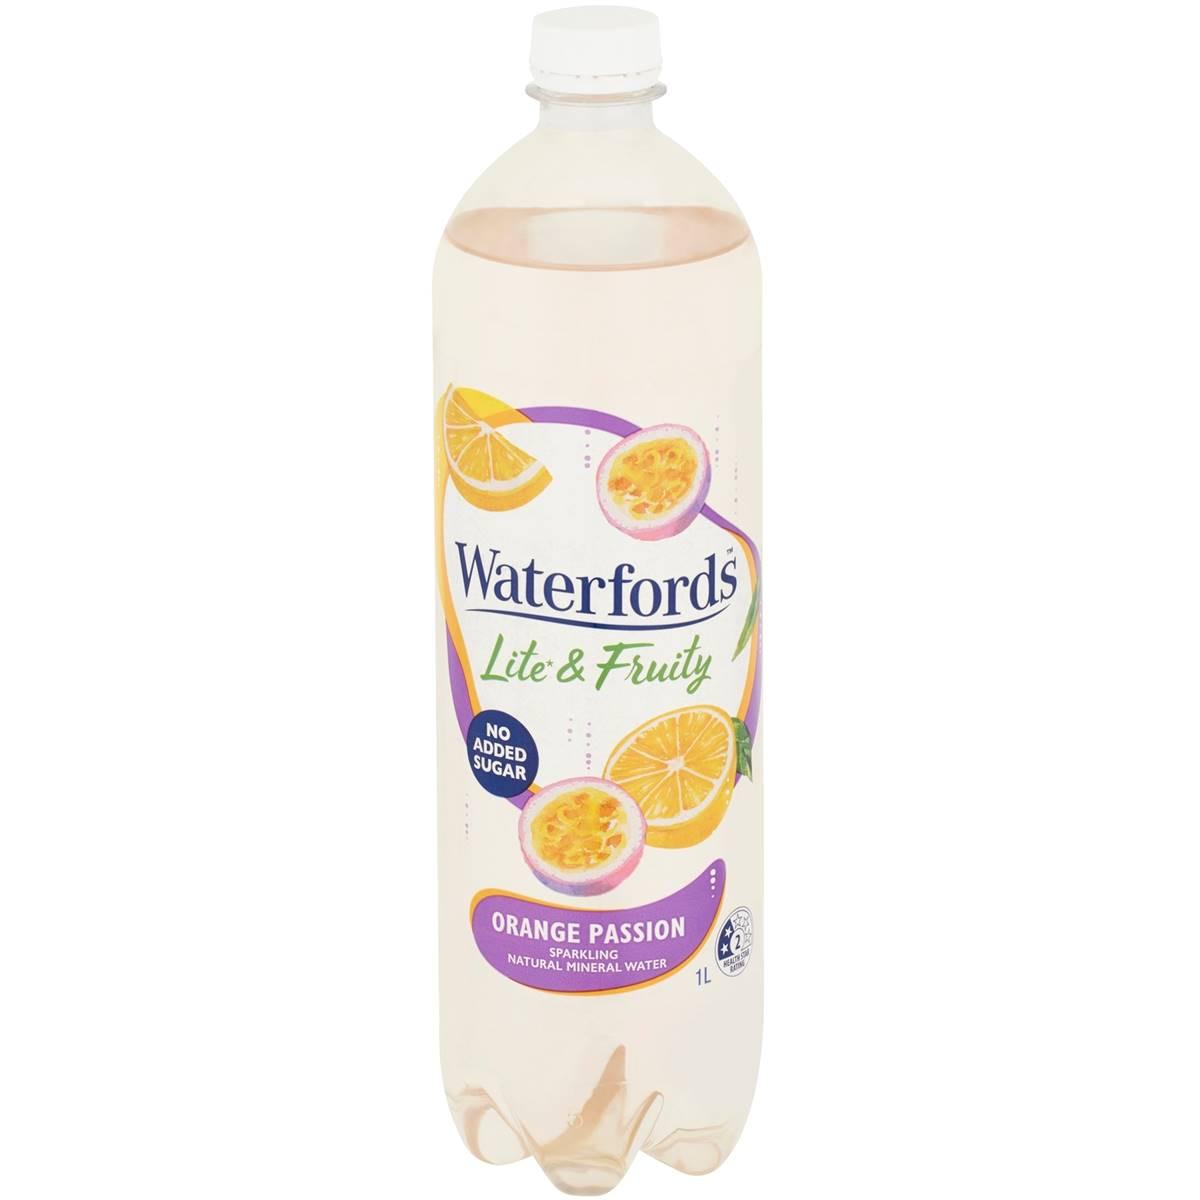 Waterfords Lite & Fruity Orange Passion 1l